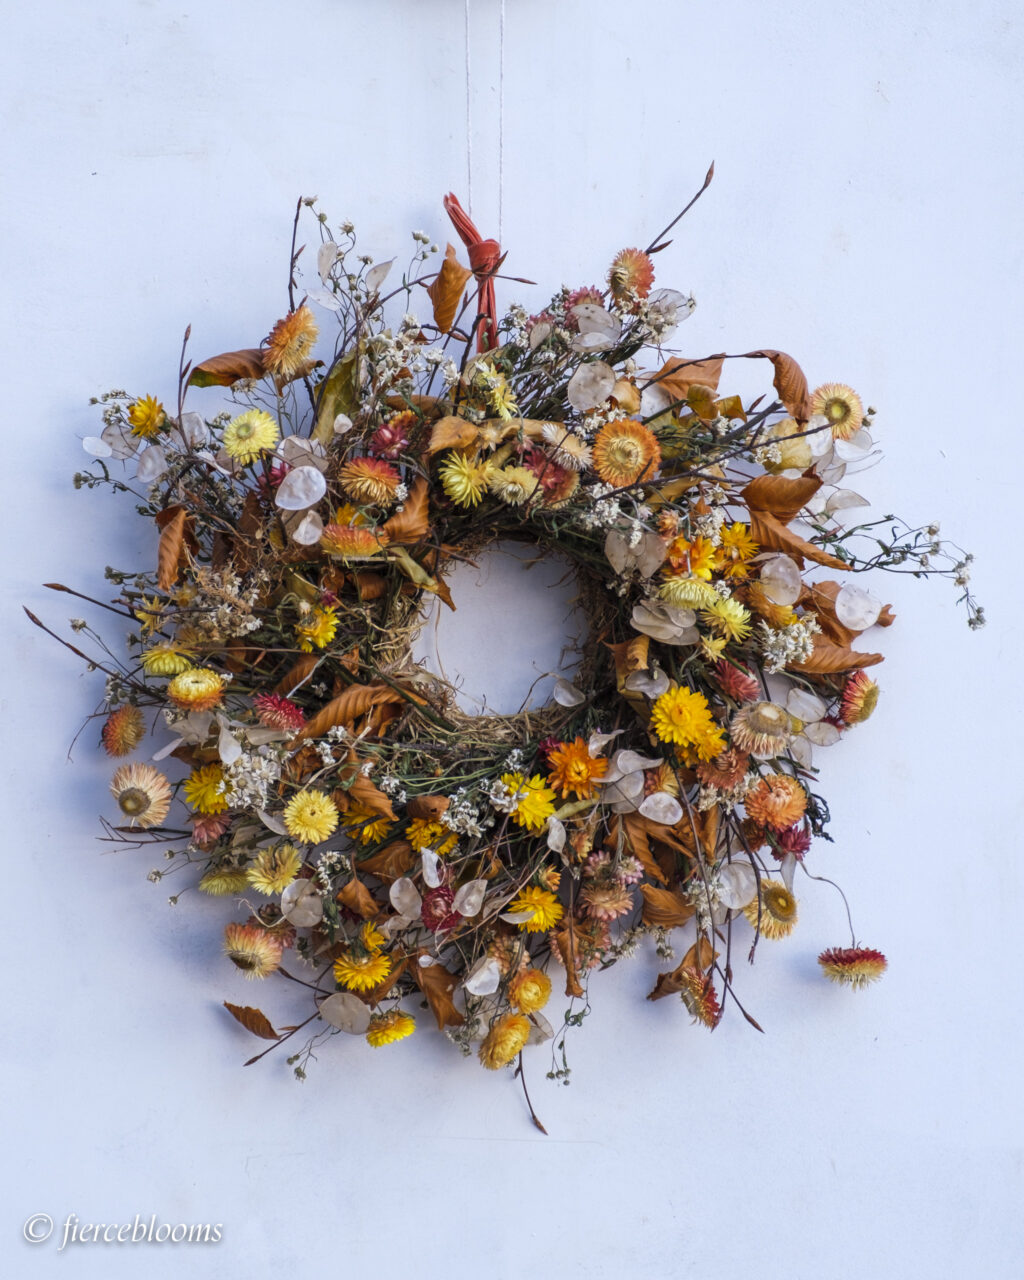 A wreath with sustainable flowers at its heart. Locally grown dried strawflowers adorn a sustainable, biodegradable base. By Fierceblooms, Cheshire.